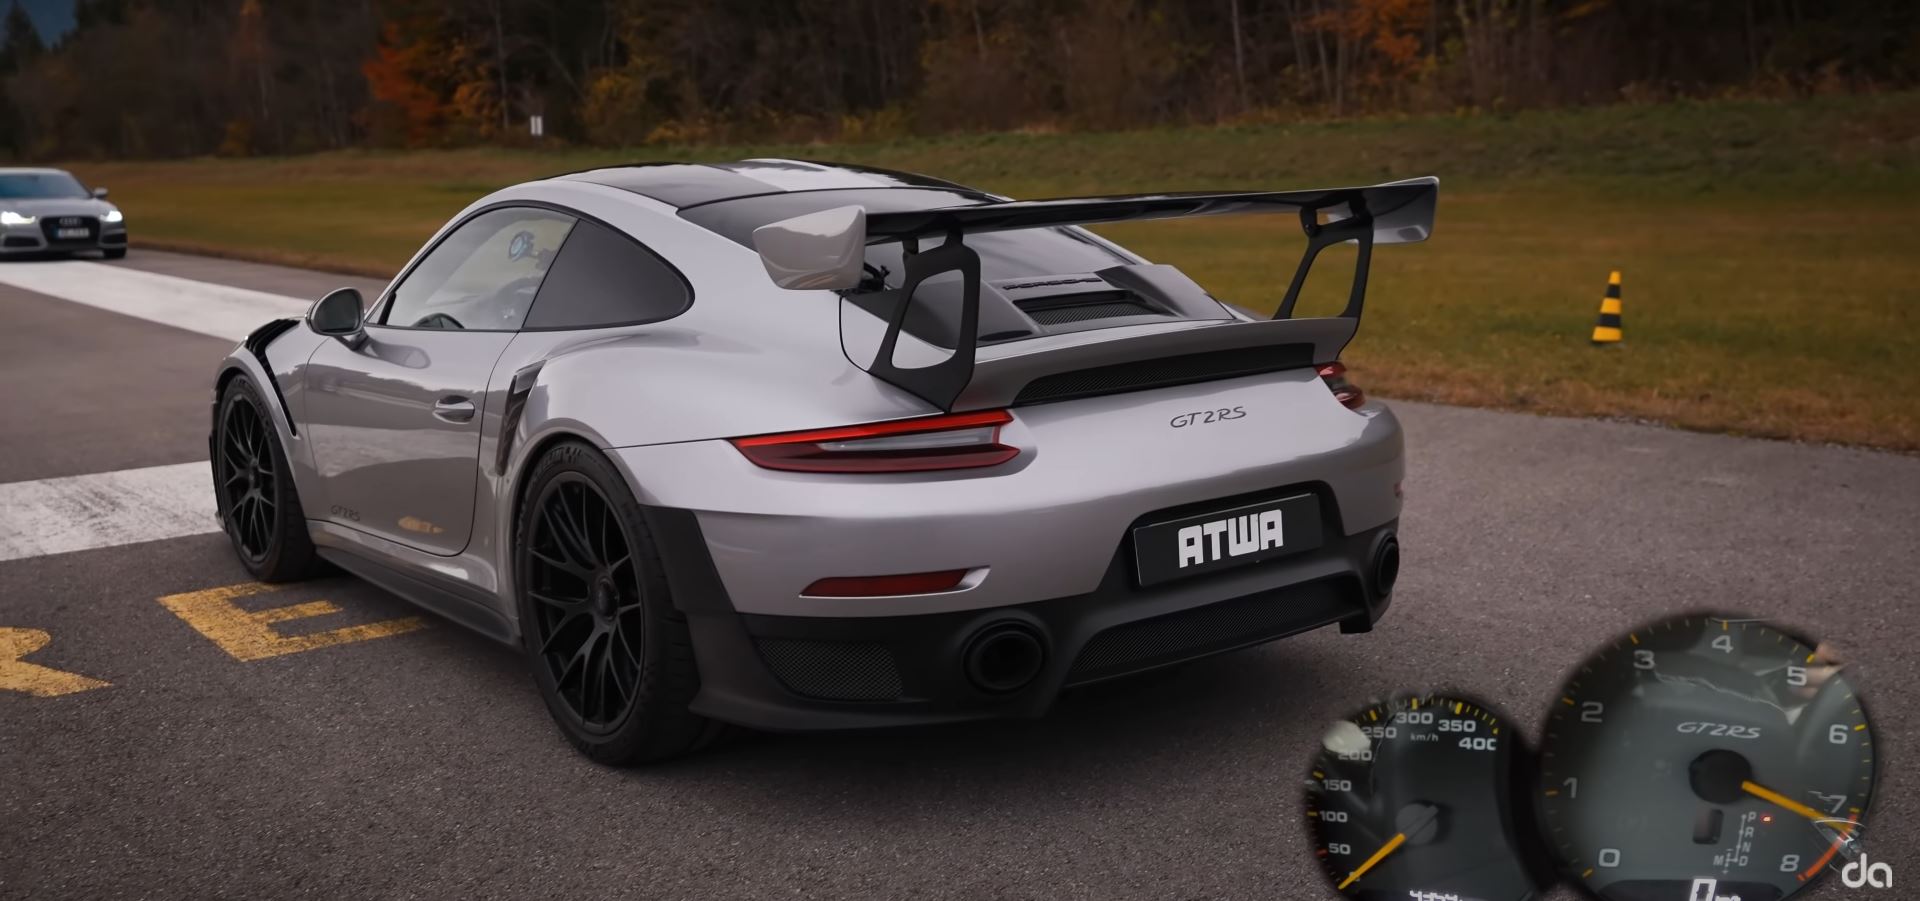 a quarter-mile drag race between a Ducati Panigale V4 S and a Porsche GT2 RS